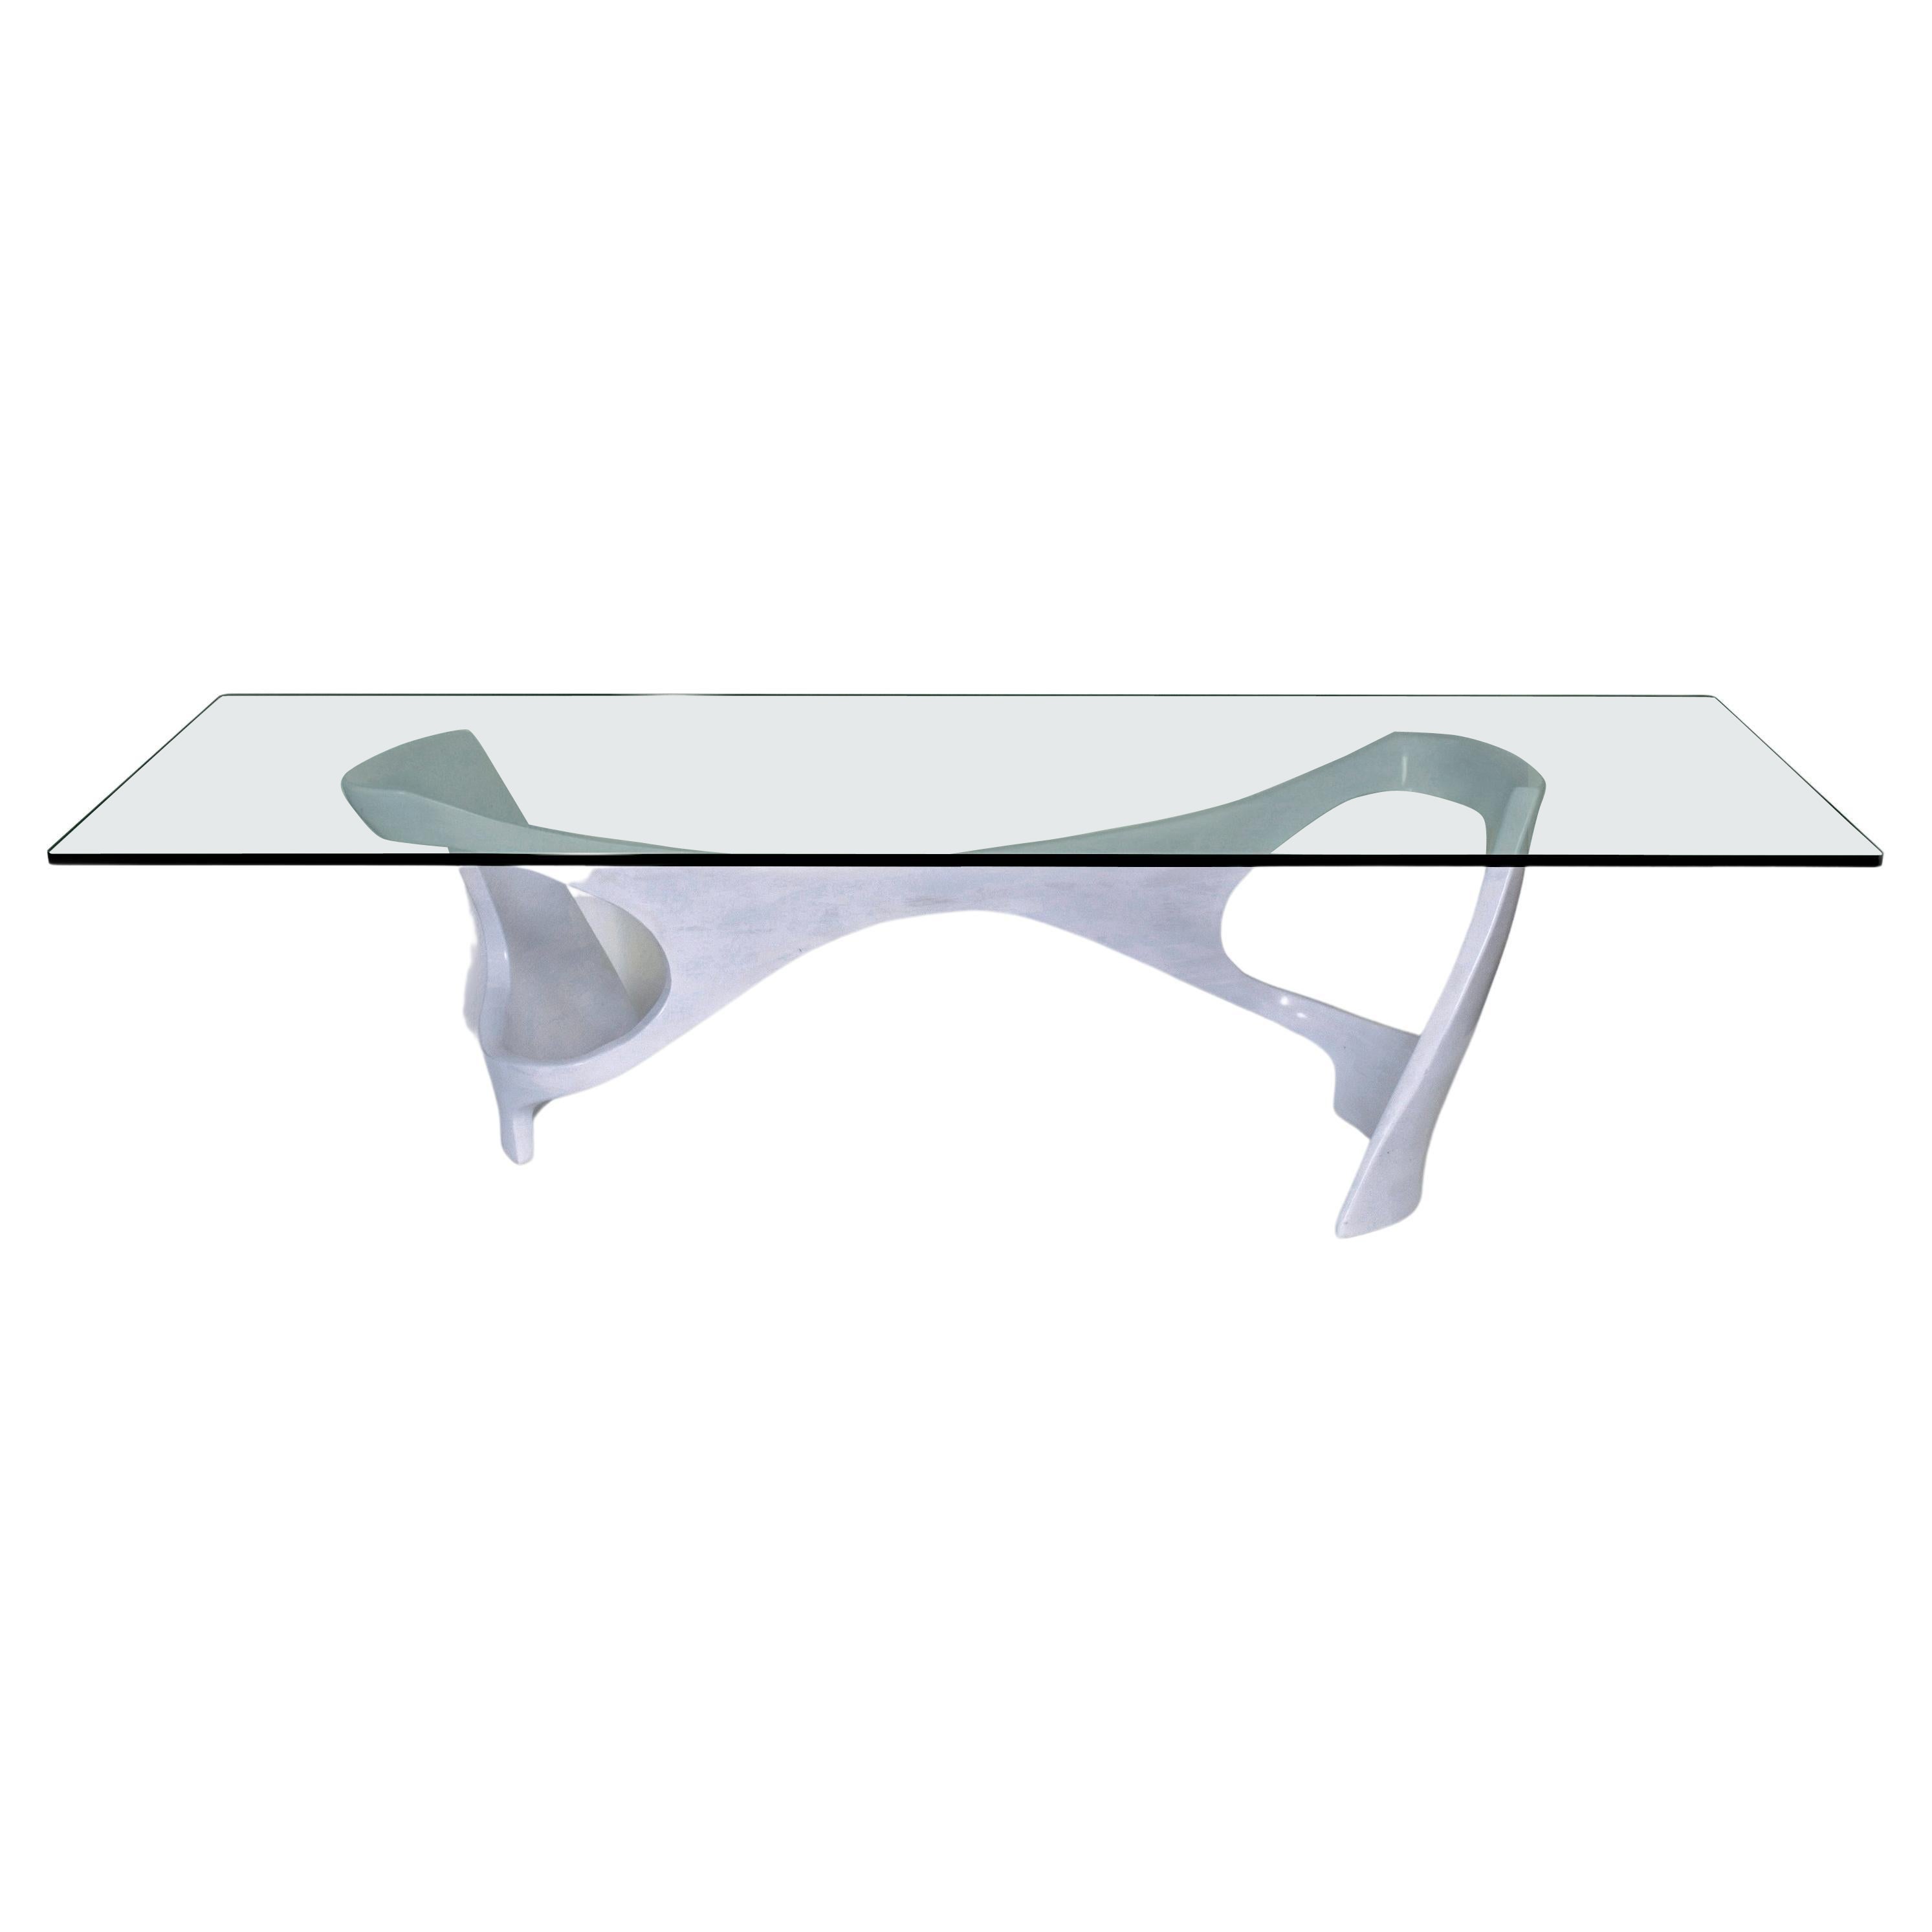 N2 Dining Table by Aaron Scott